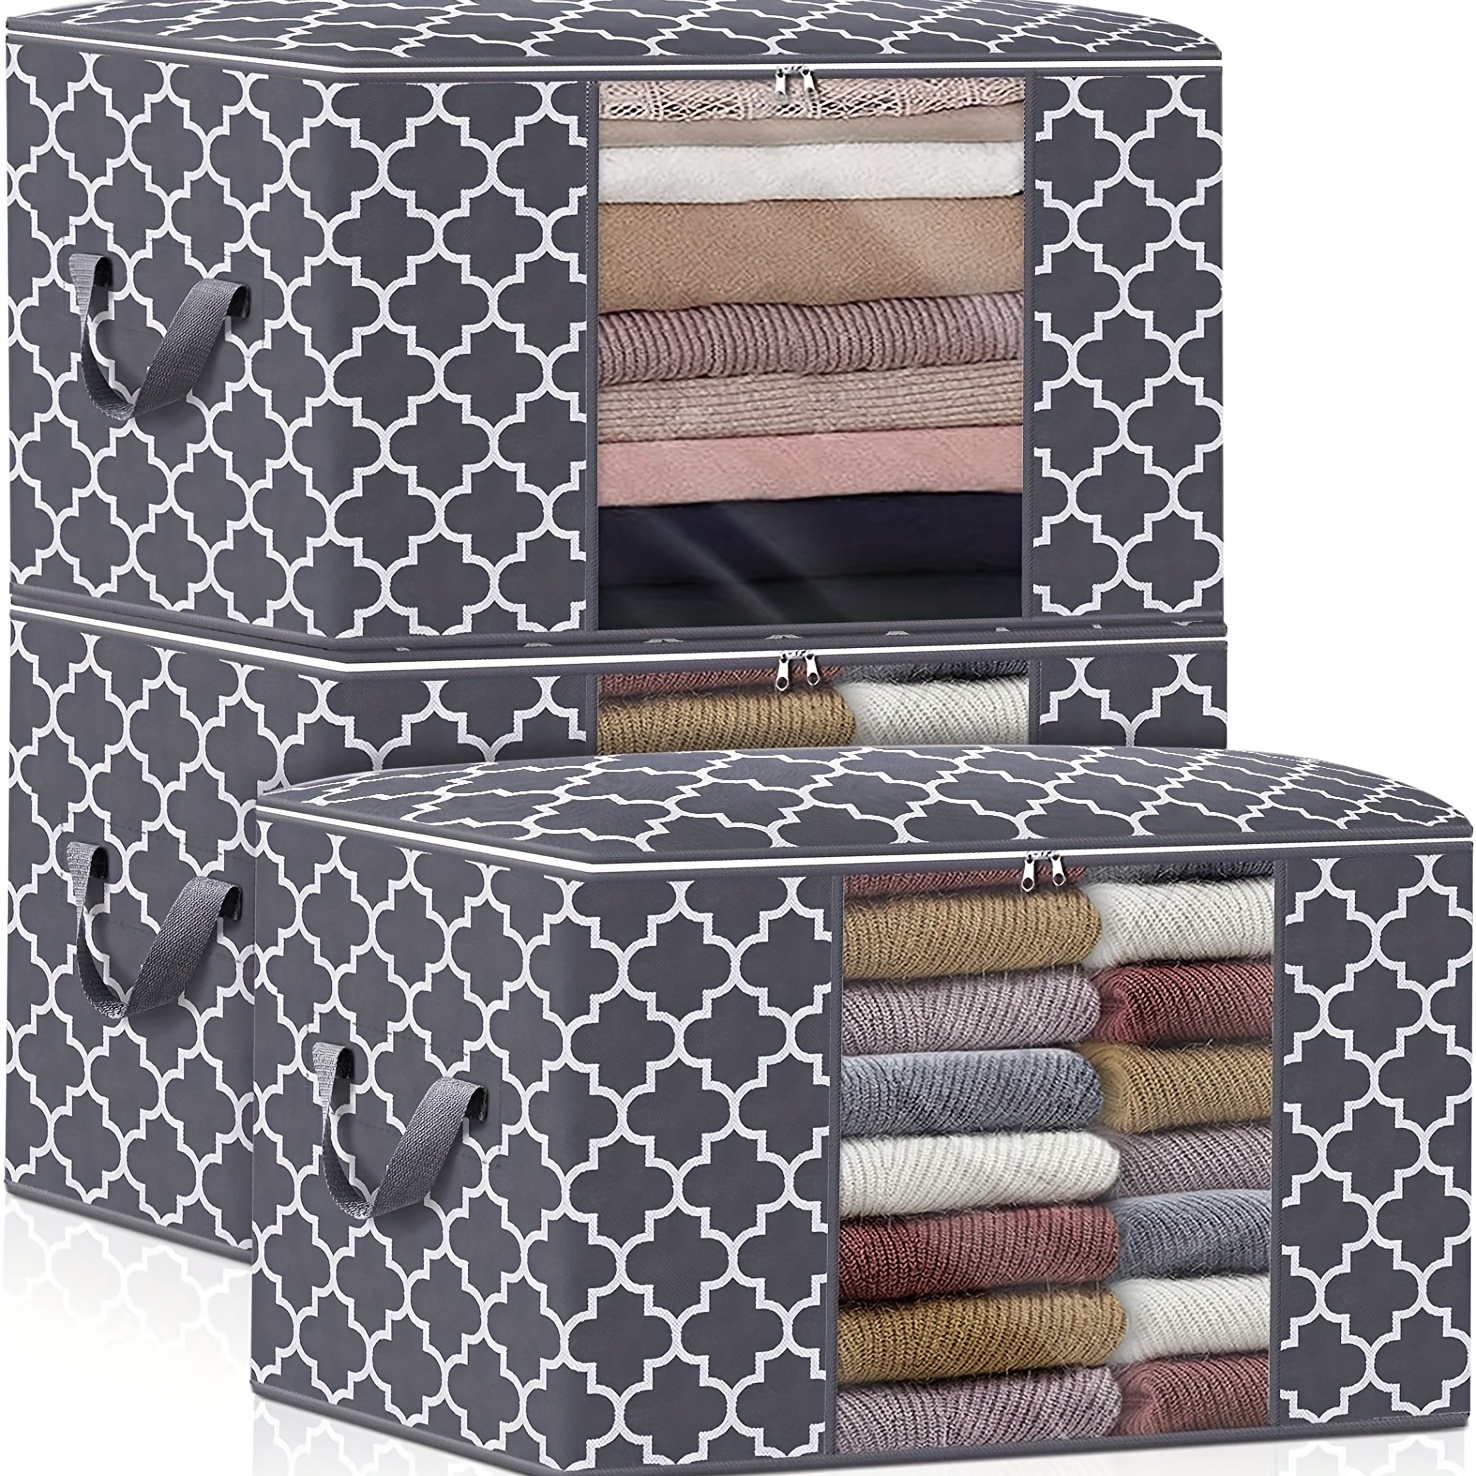 

Maximize Your Storage Space With Multifunctional Large Capacity Foldable Storage Containers!